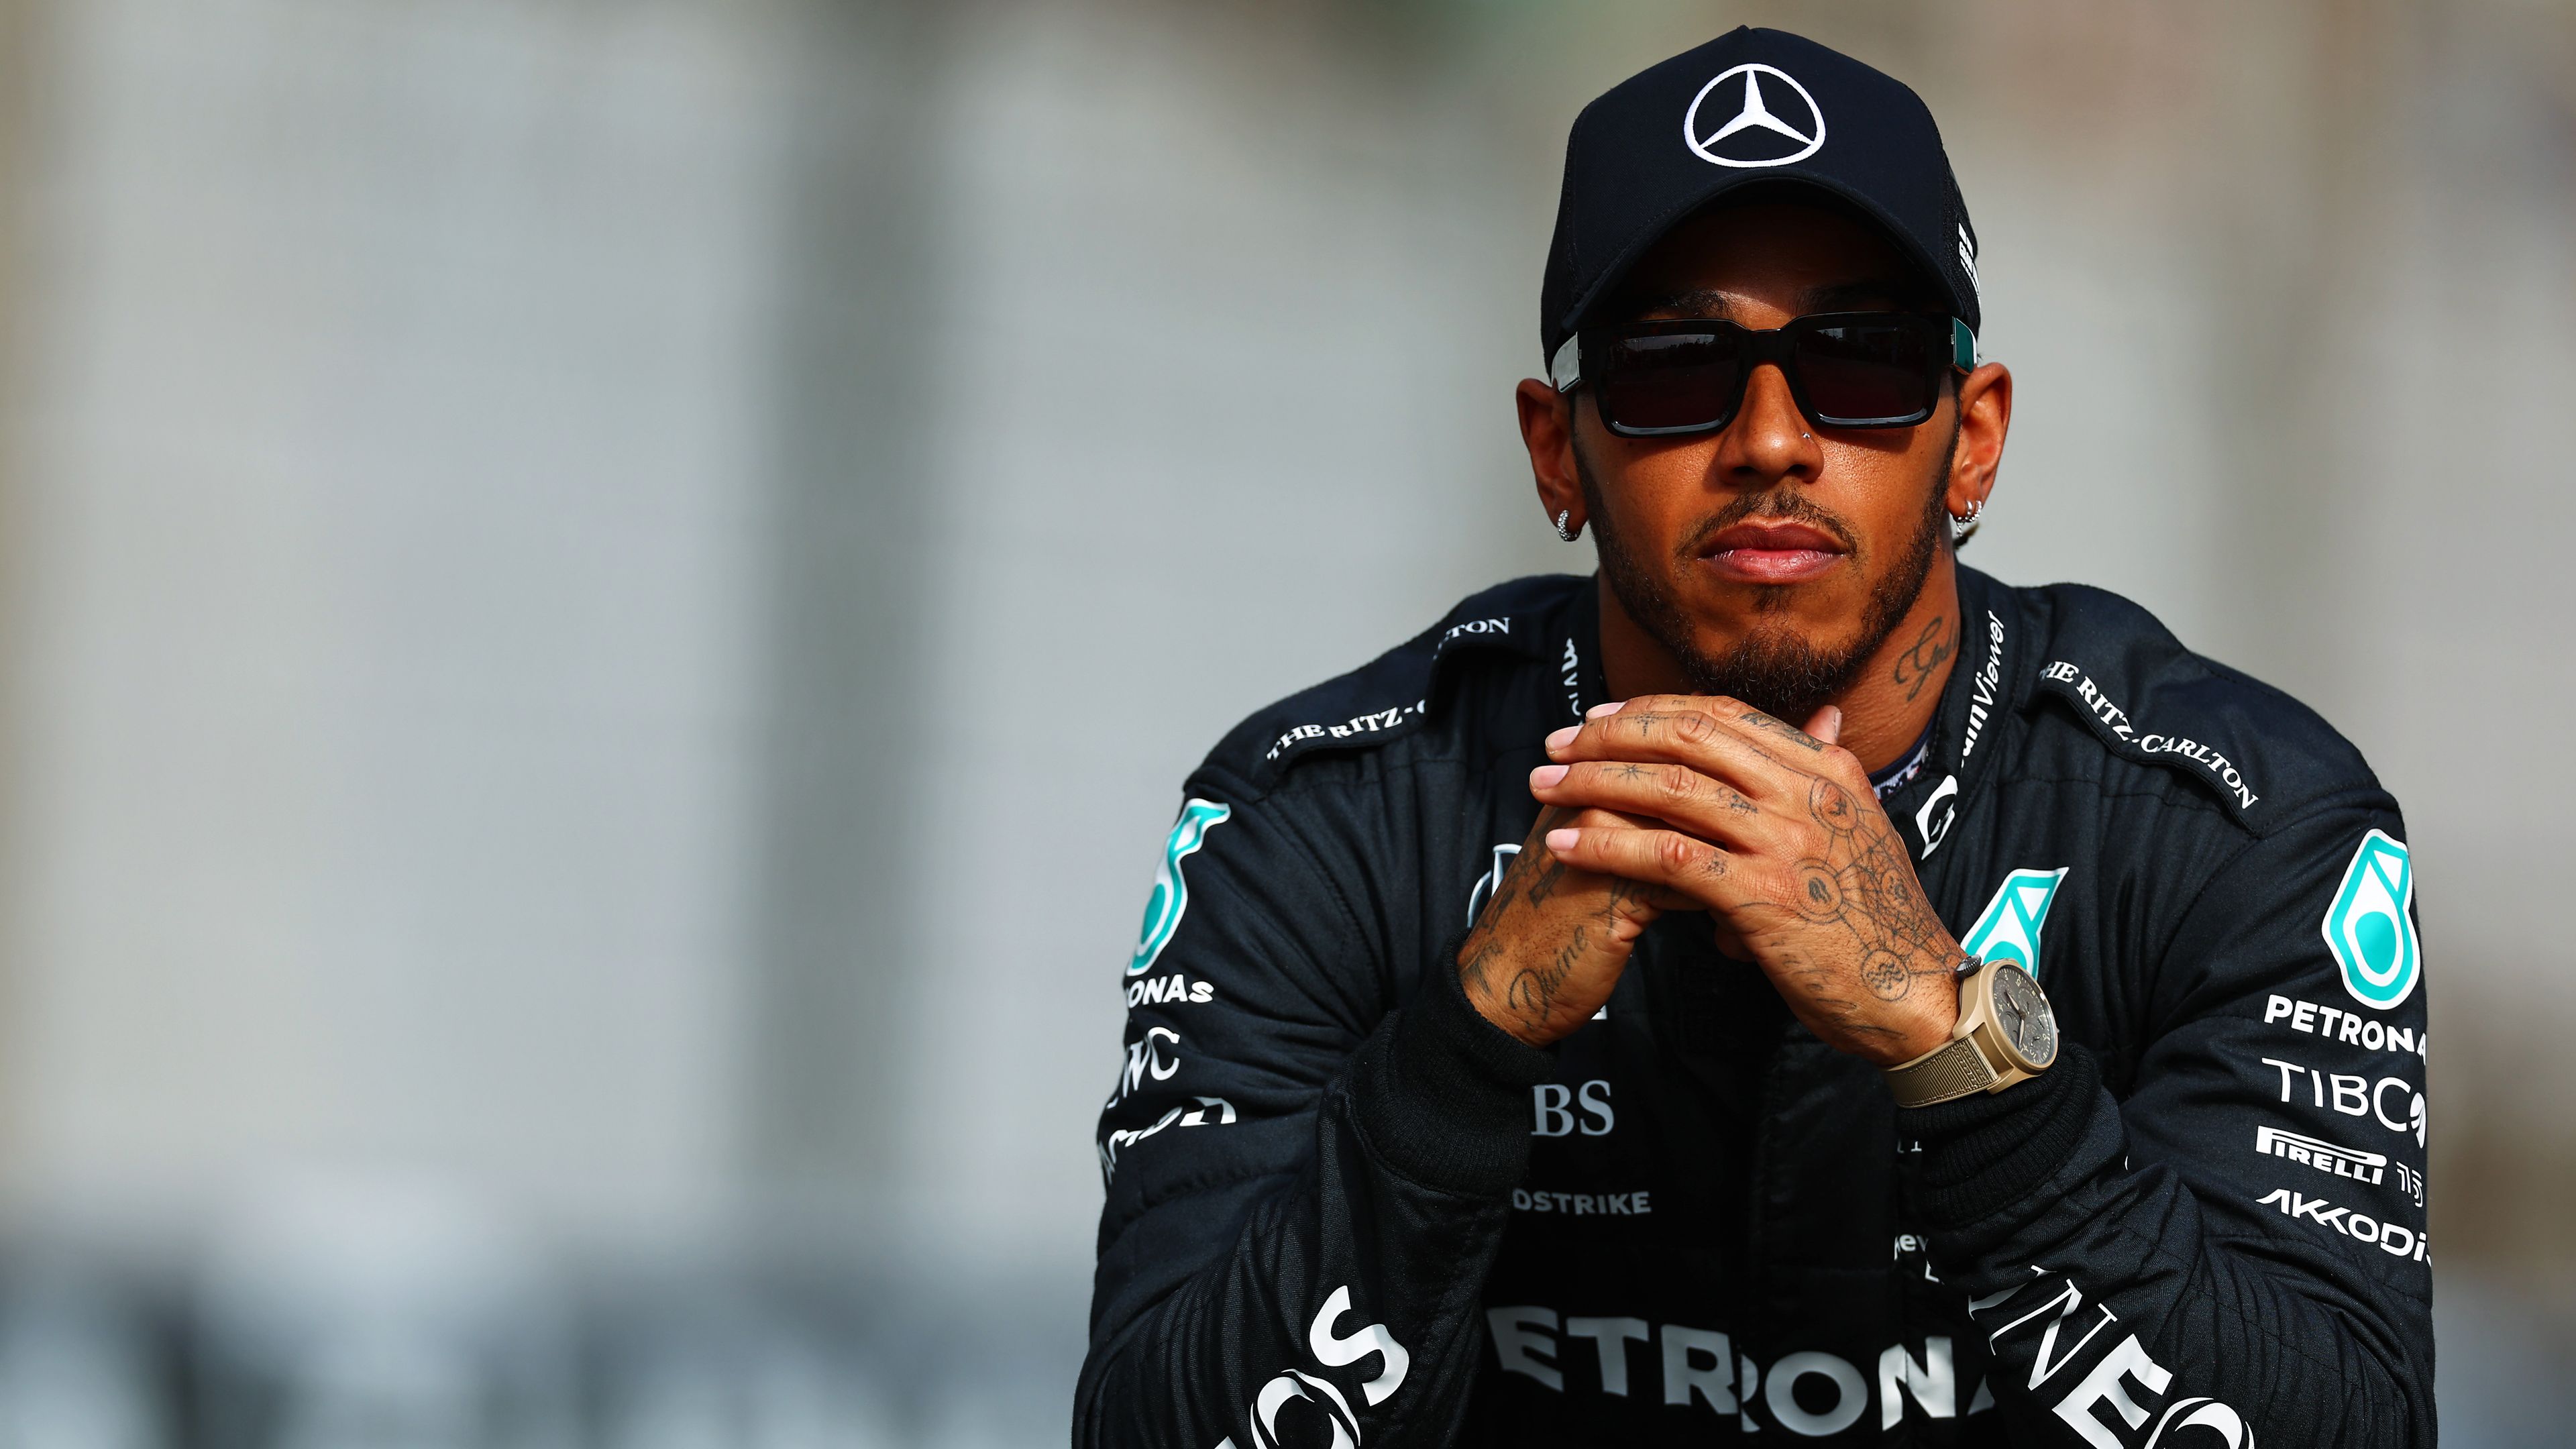 Lewis Hamilton eyeing $691 million payday with new deal